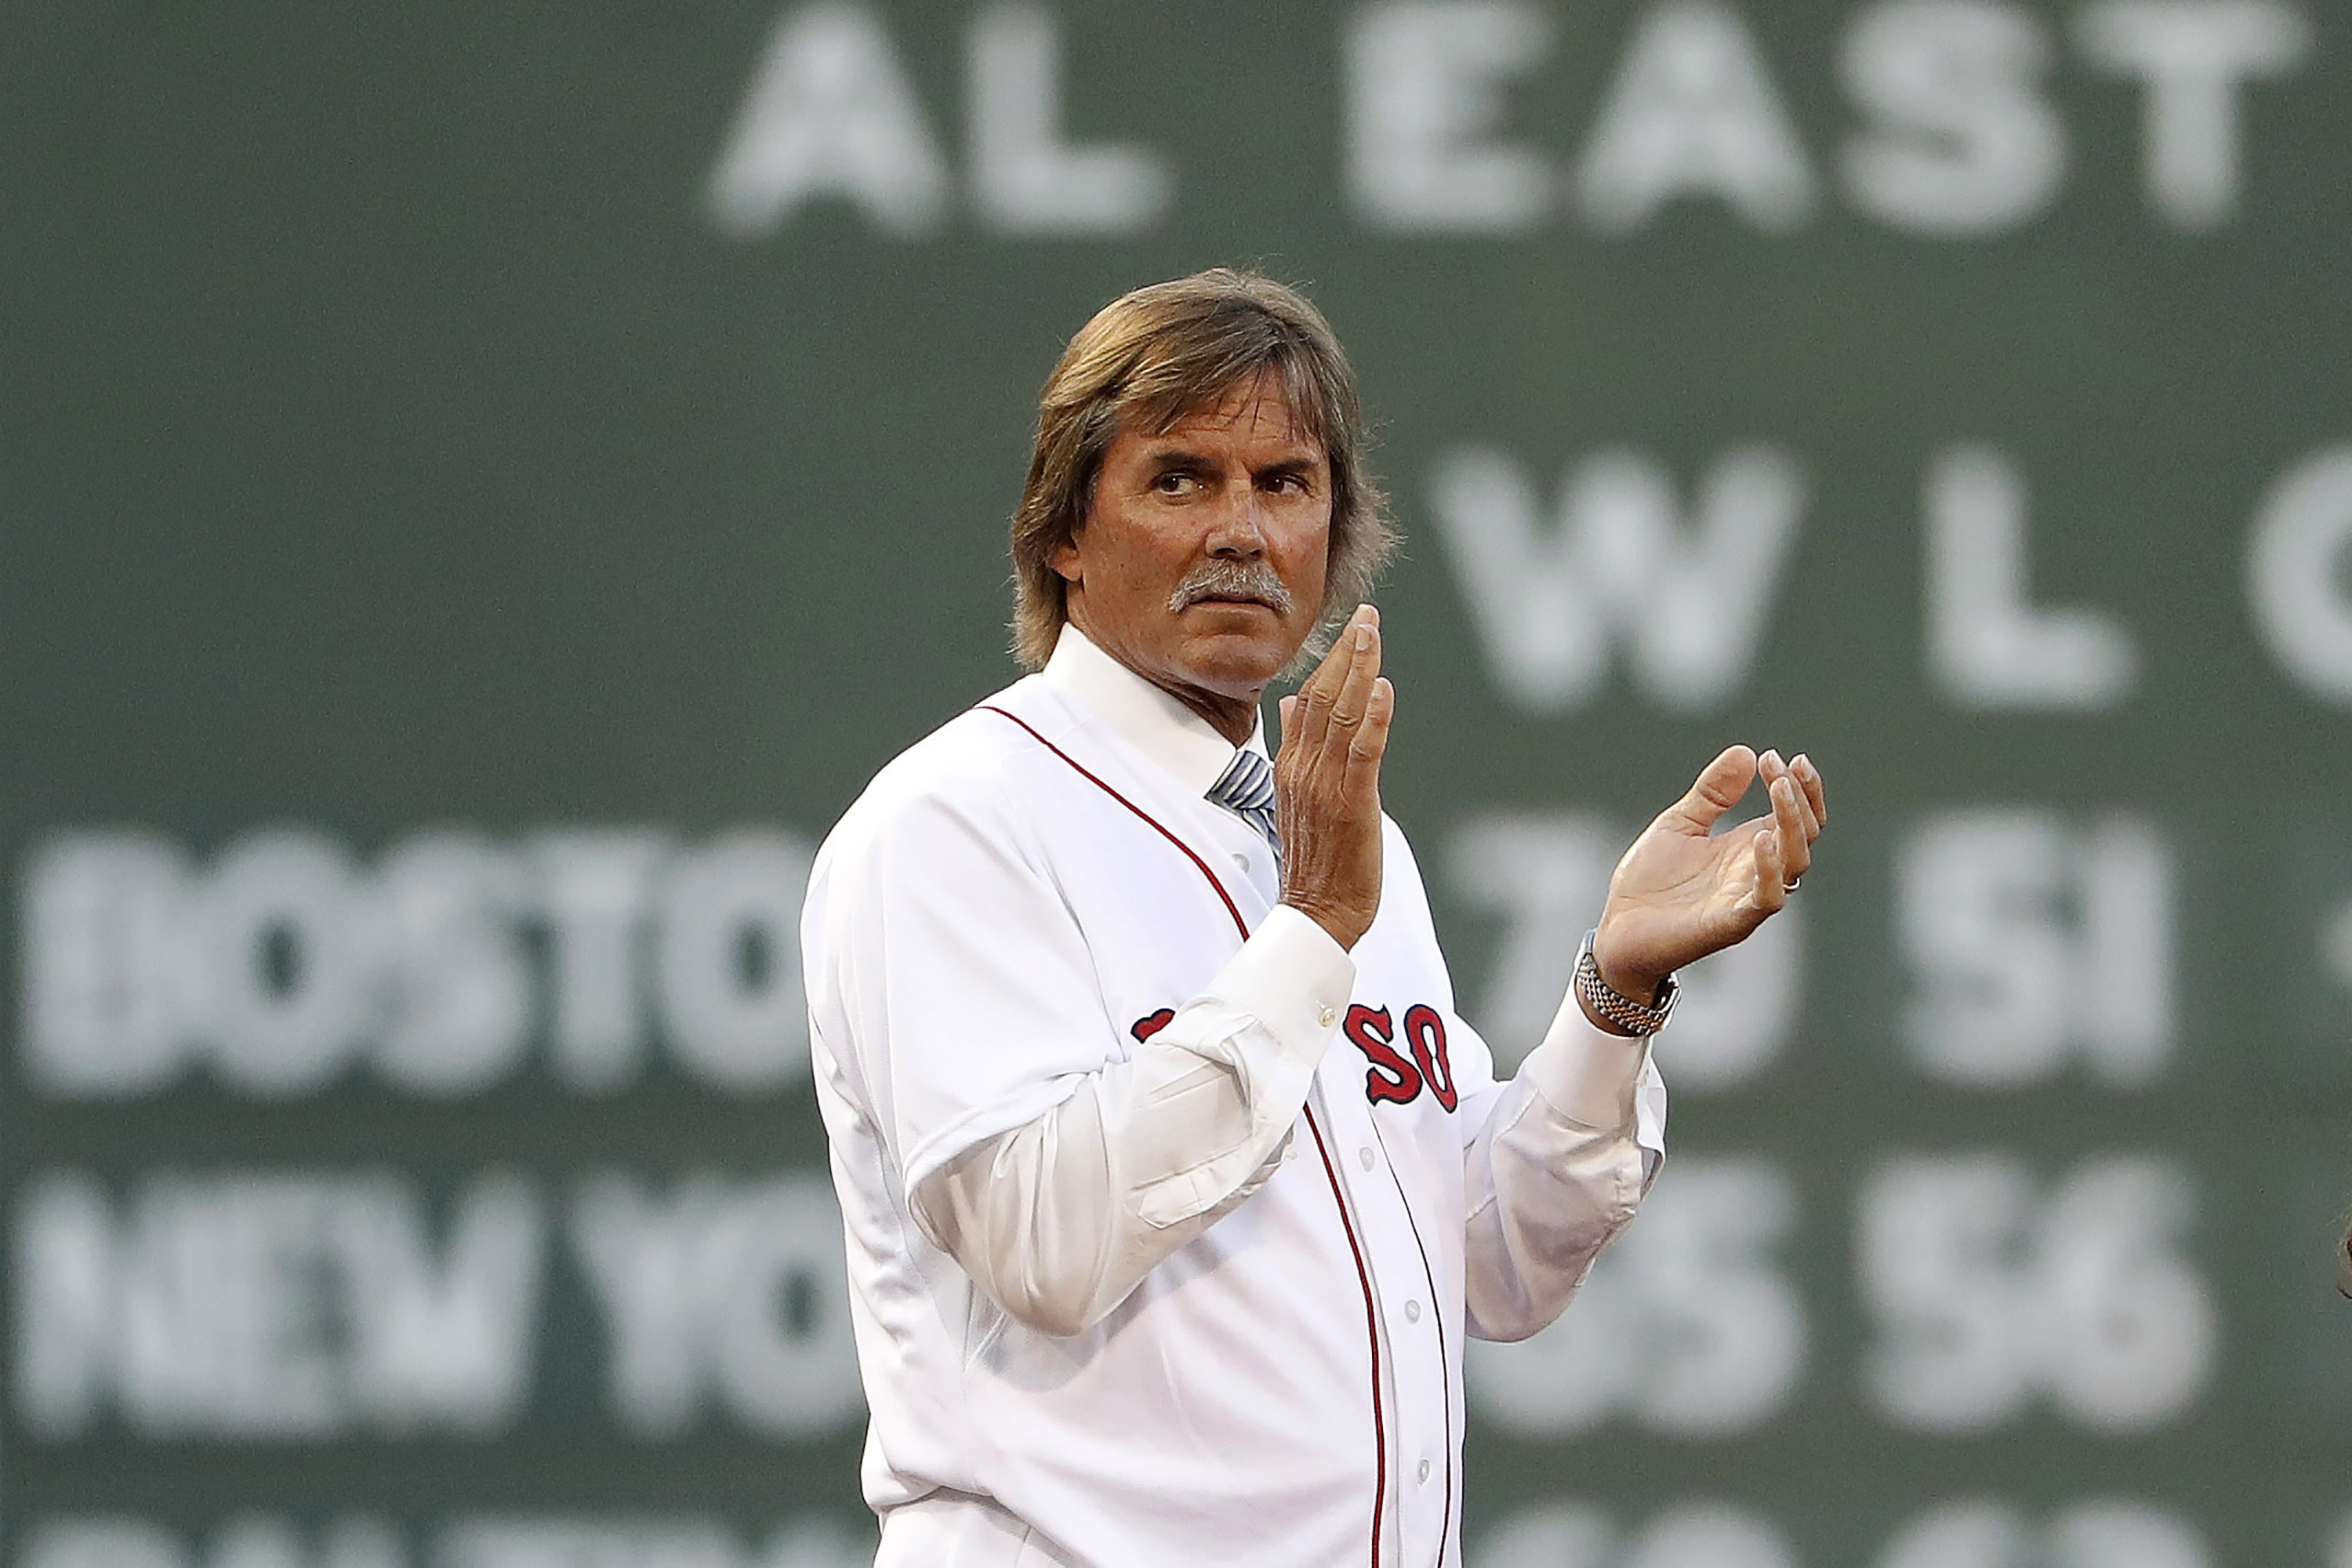 Movember 10 – Dennis Eckersley moustache – BEST PLAYER IN THE WORLD